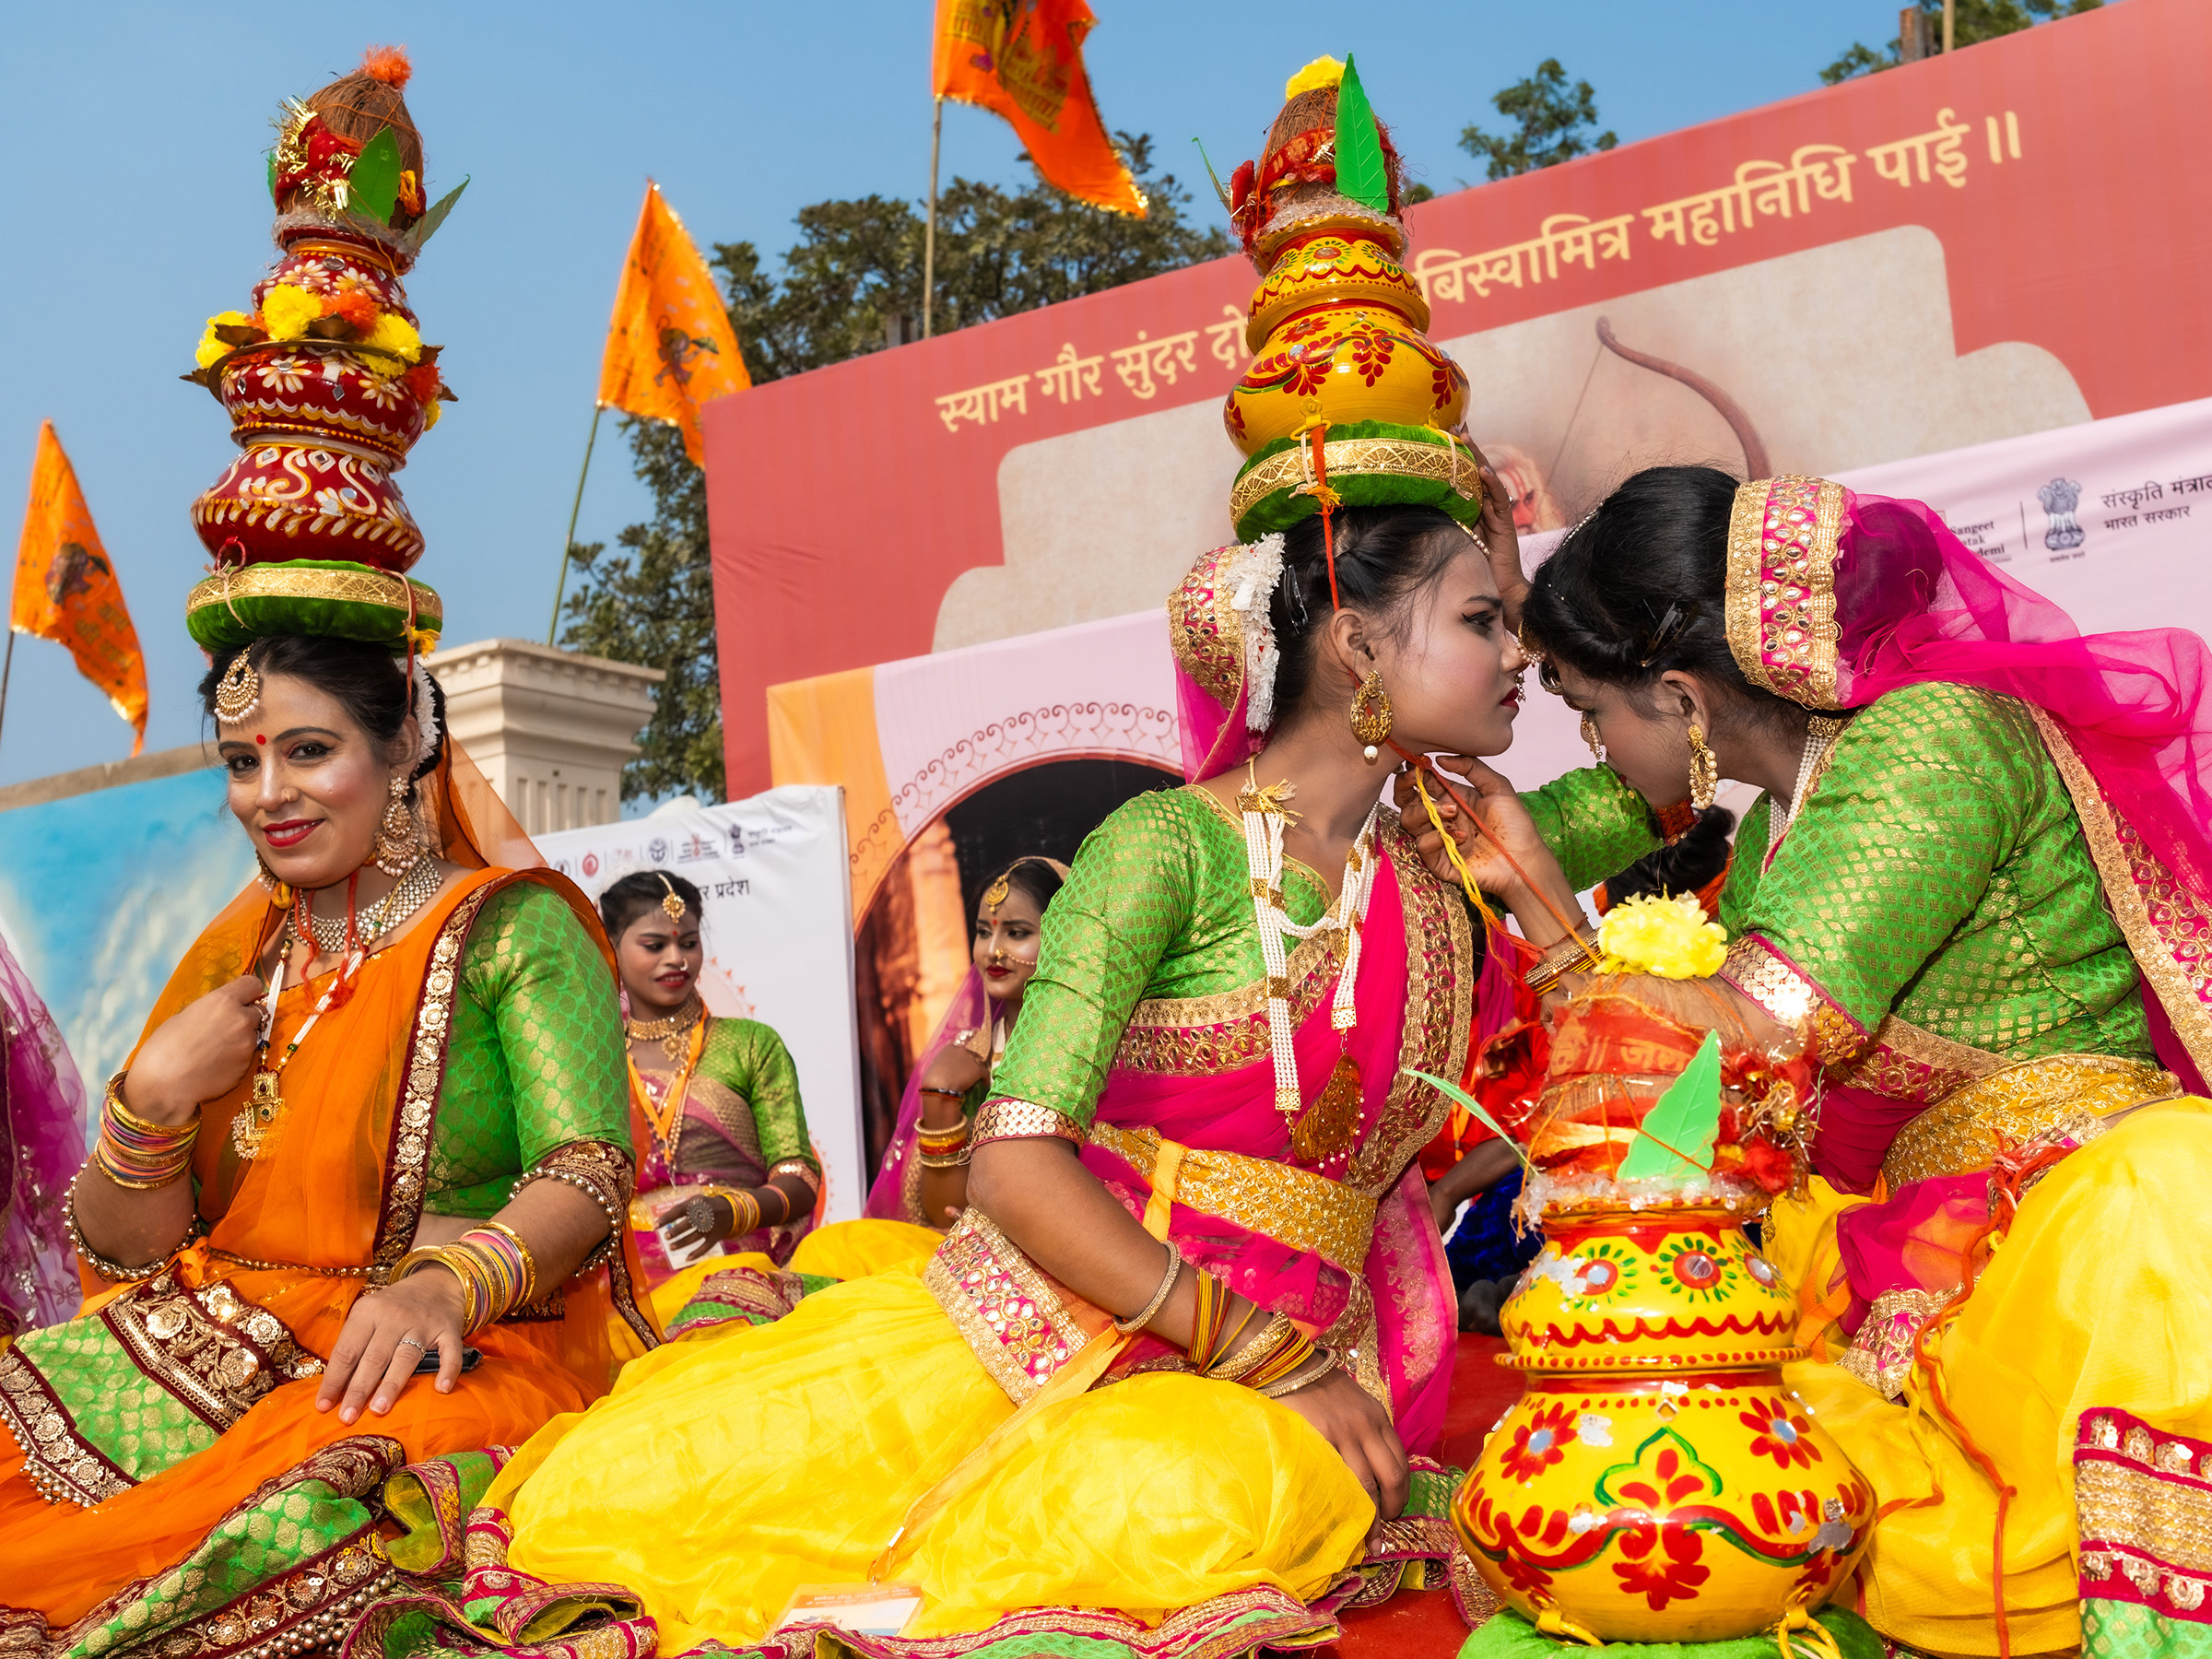 One day before the consecration of the Ram temple in Ayodhya, performing artists entertain crowds with traditional dances from the various states of India.